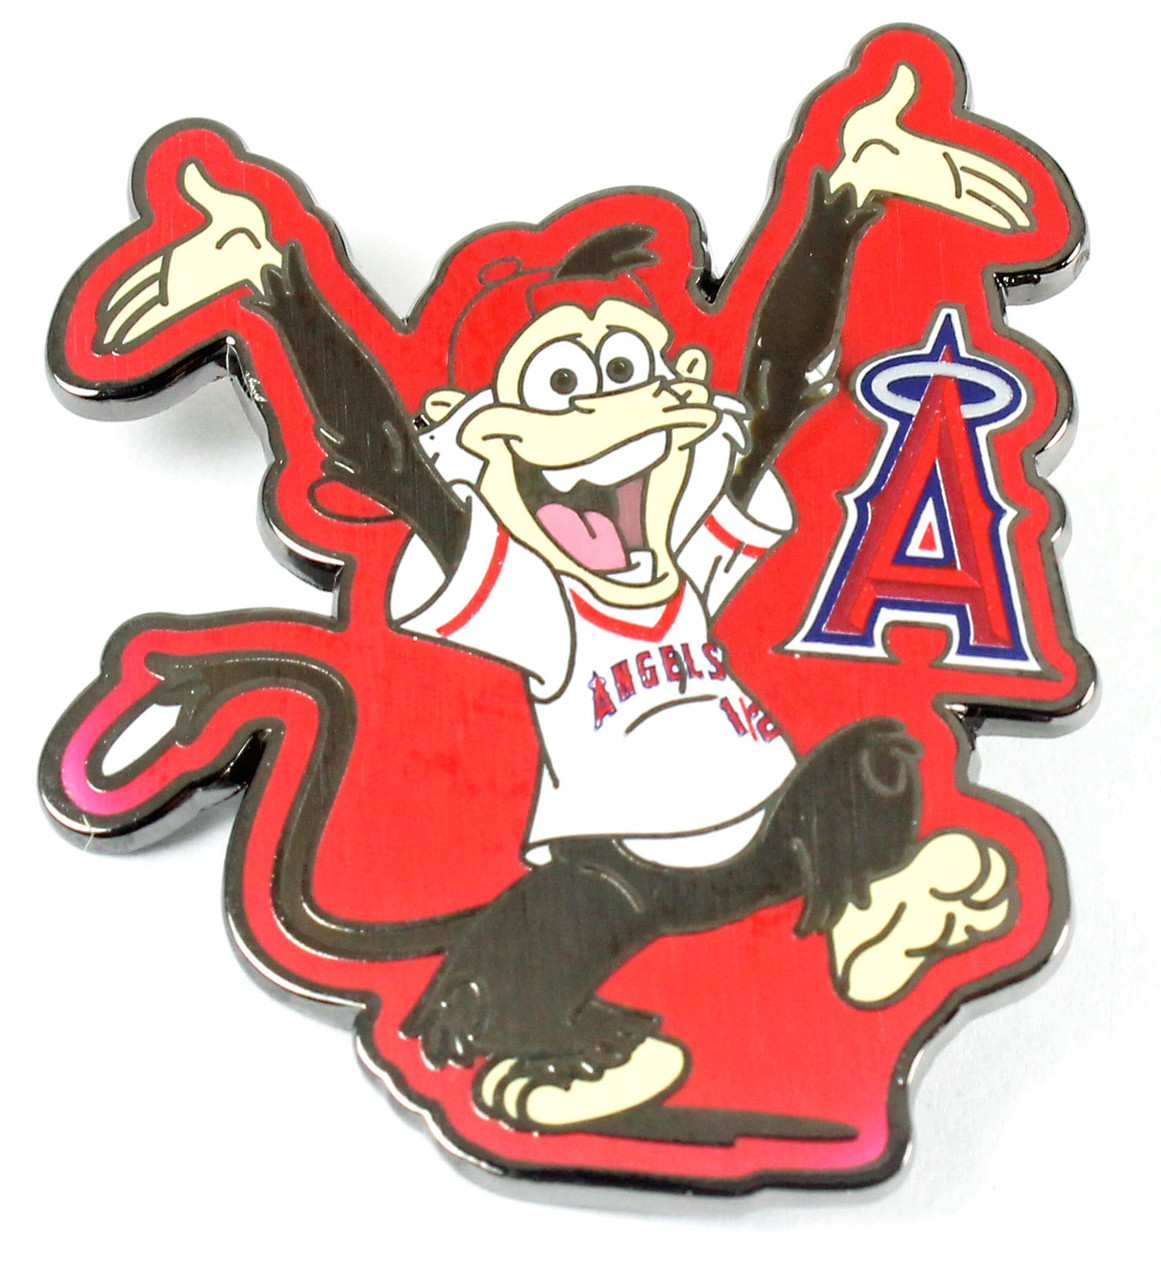 History of the Angels' Rally Monkey